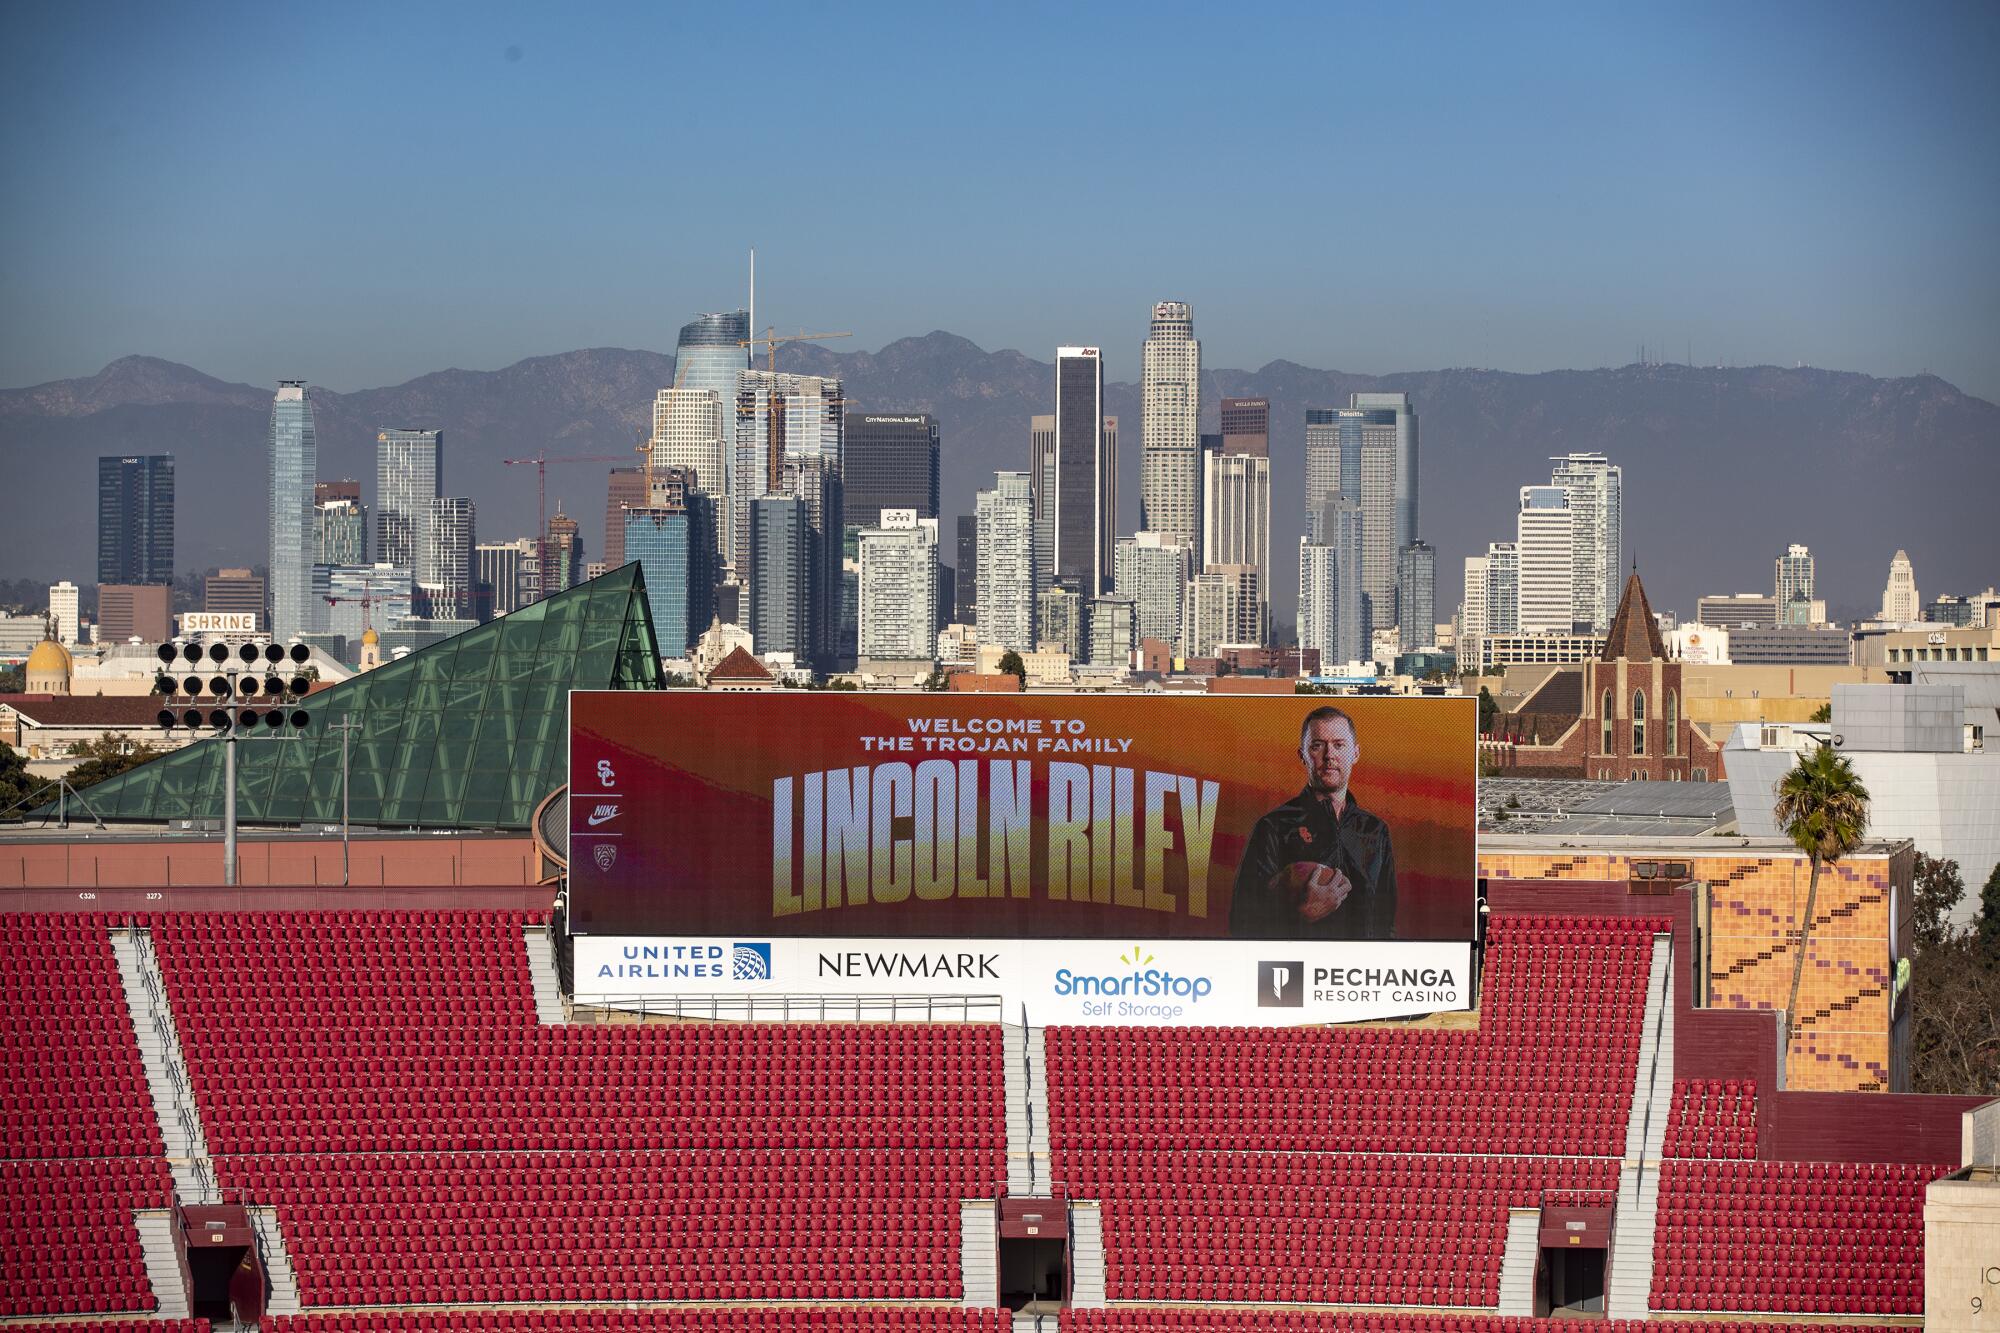 A giant video board at the Coliseum features Lincoln Riley, the Trojans' new football coach